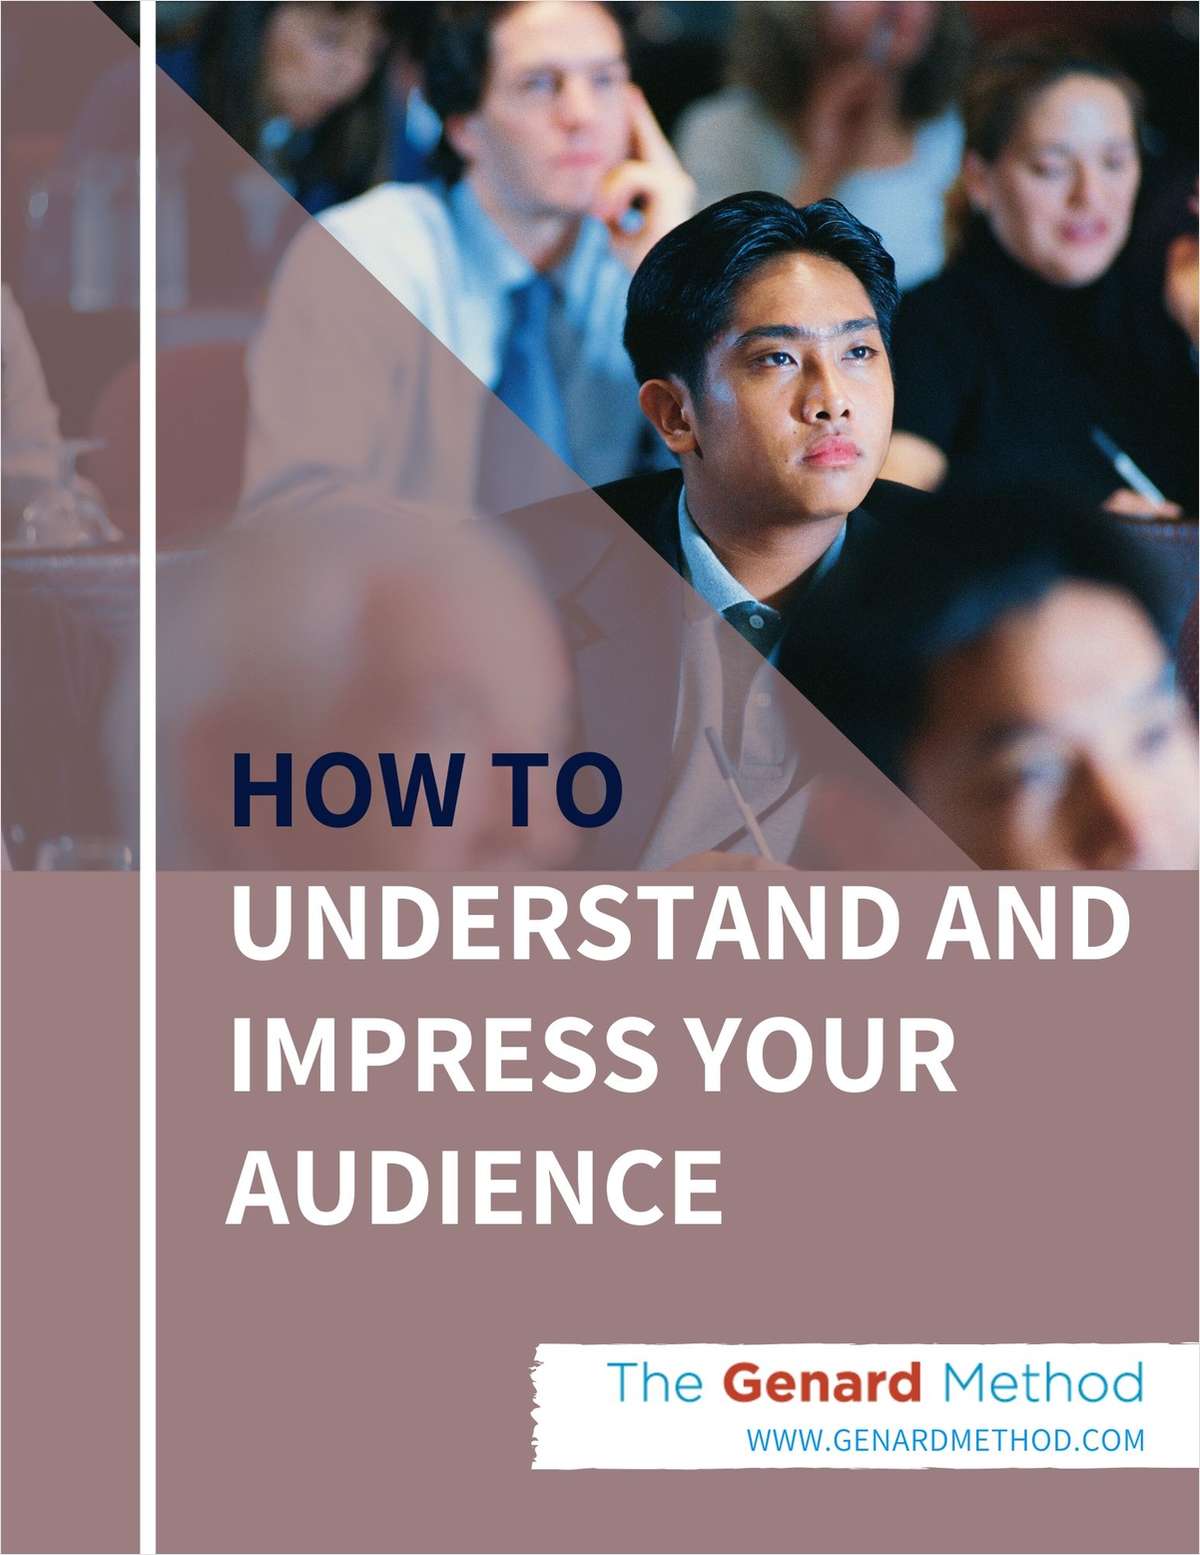 w thab57c8 - How to Understand and Impress Your Audience